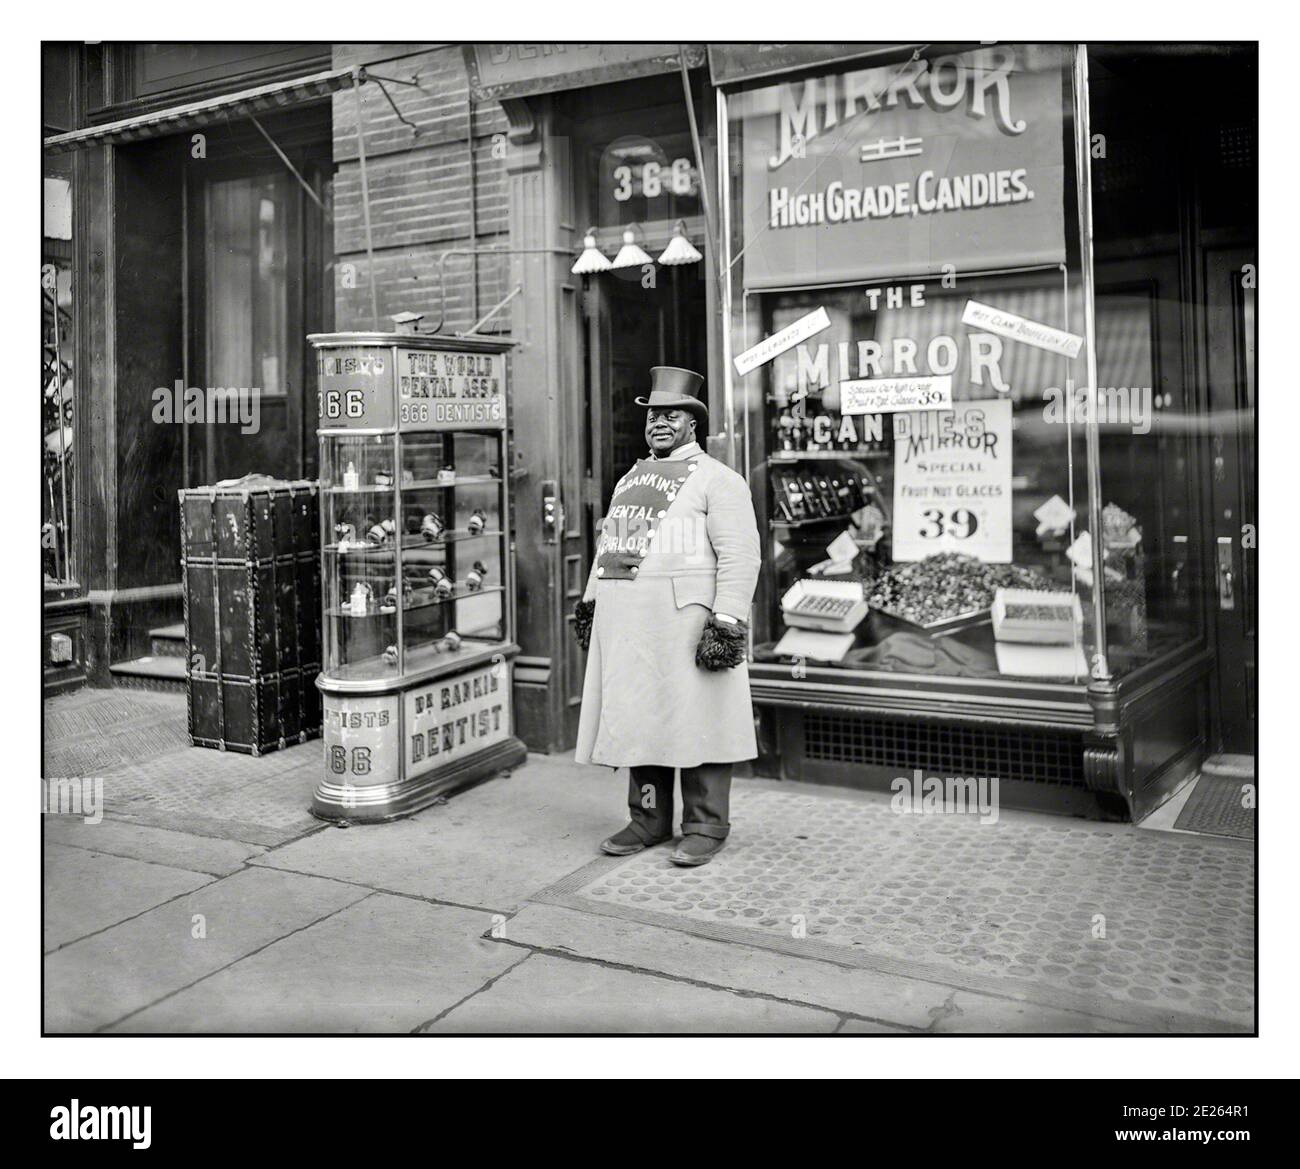 FIFTH AVENUE 1900’s New York archive street scene on Fifth Avenue Manhattan, New York City.” A brand ambassador stands advertising for Dr. Rankin’s Dental Practice Parlor, conveniently close to a confectionary sweet candy store 1905 Stock Photo